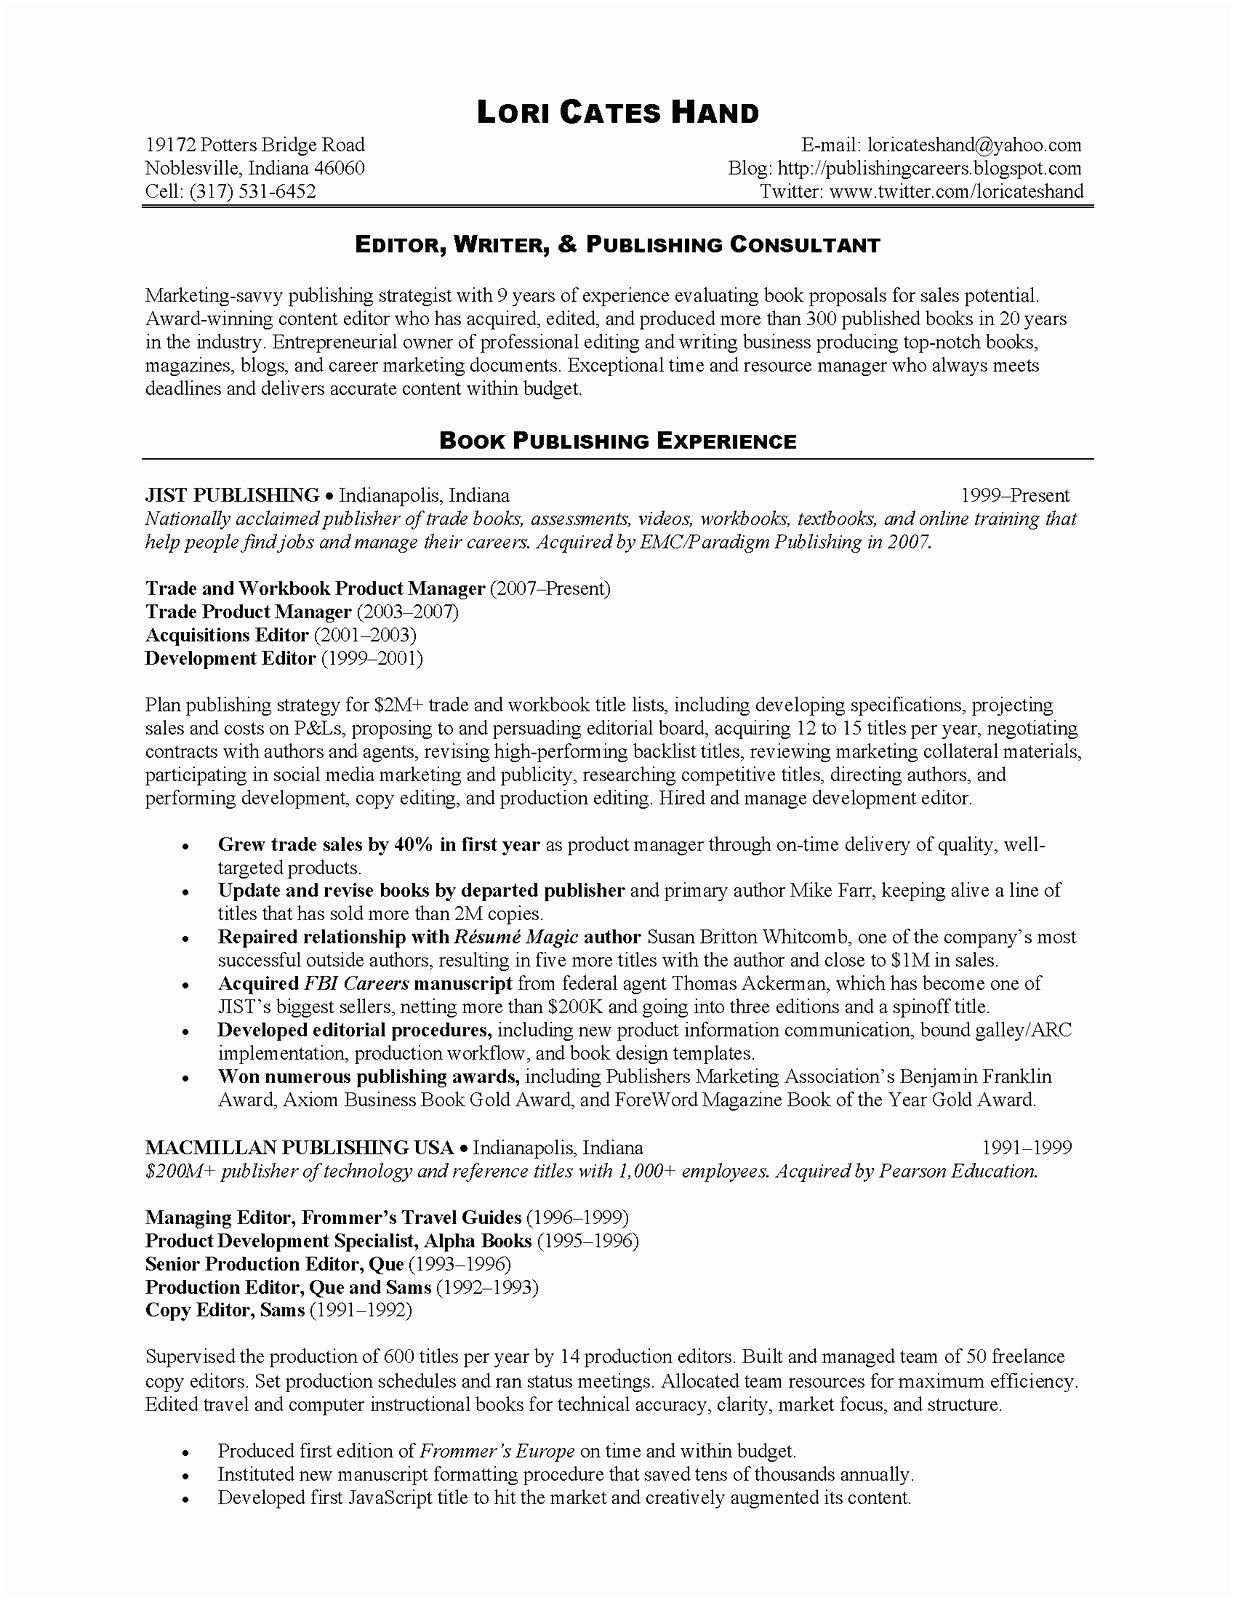 Resume Sample Marketing New American Resume Sample New Student Resume 0d Wallpapers 42 Awesome